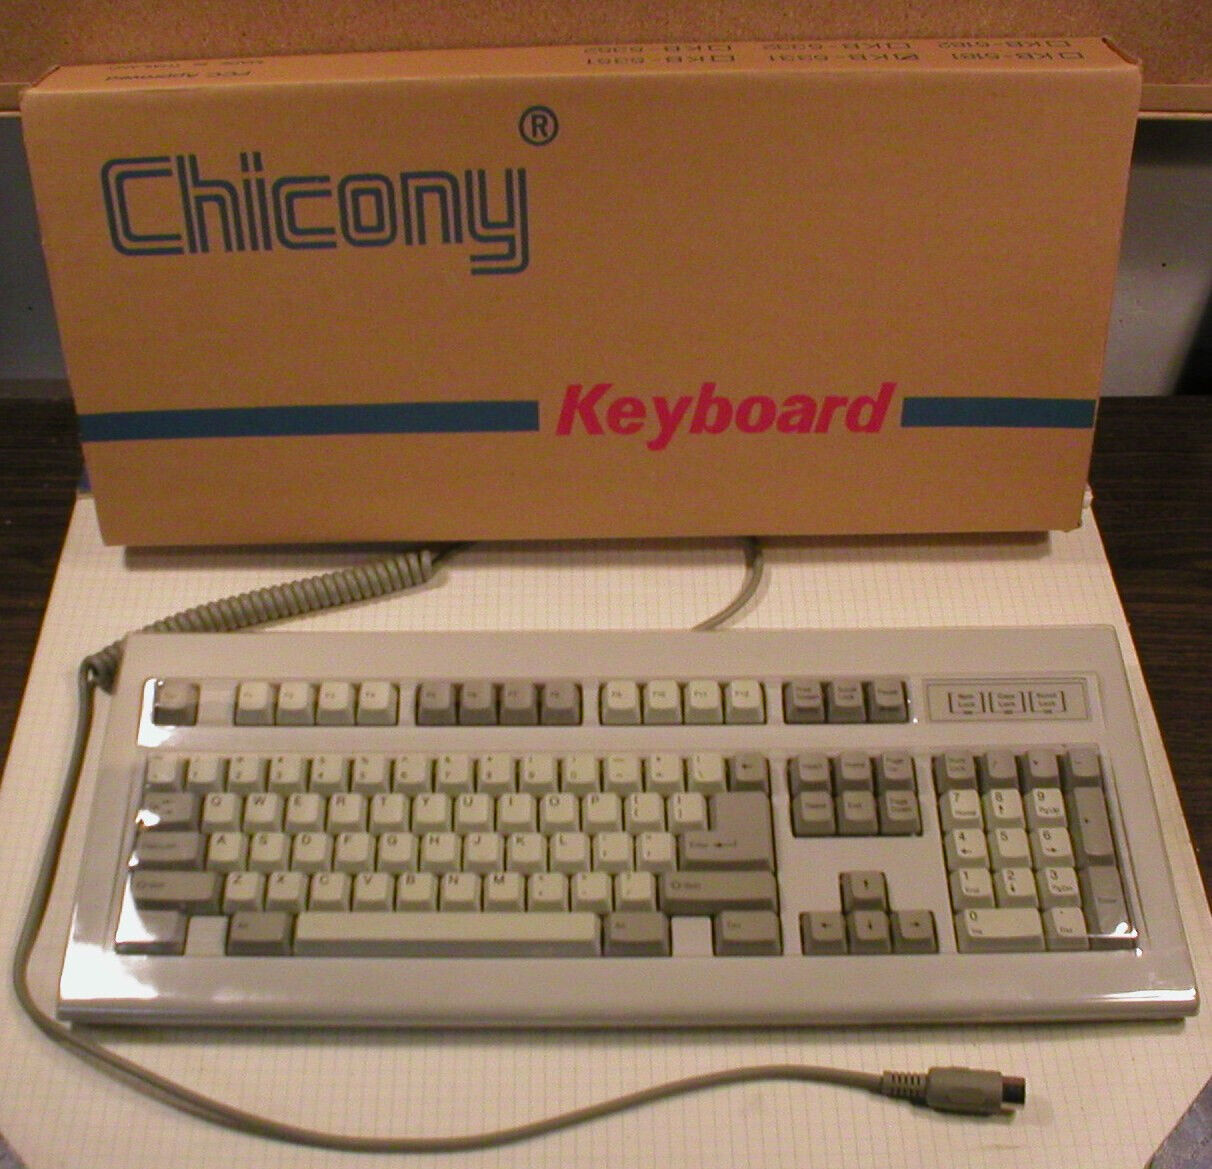 Vintage Chicony brand 5-Pin AT Keyboard Model KB-5331 (Used and Tested) w/ Box